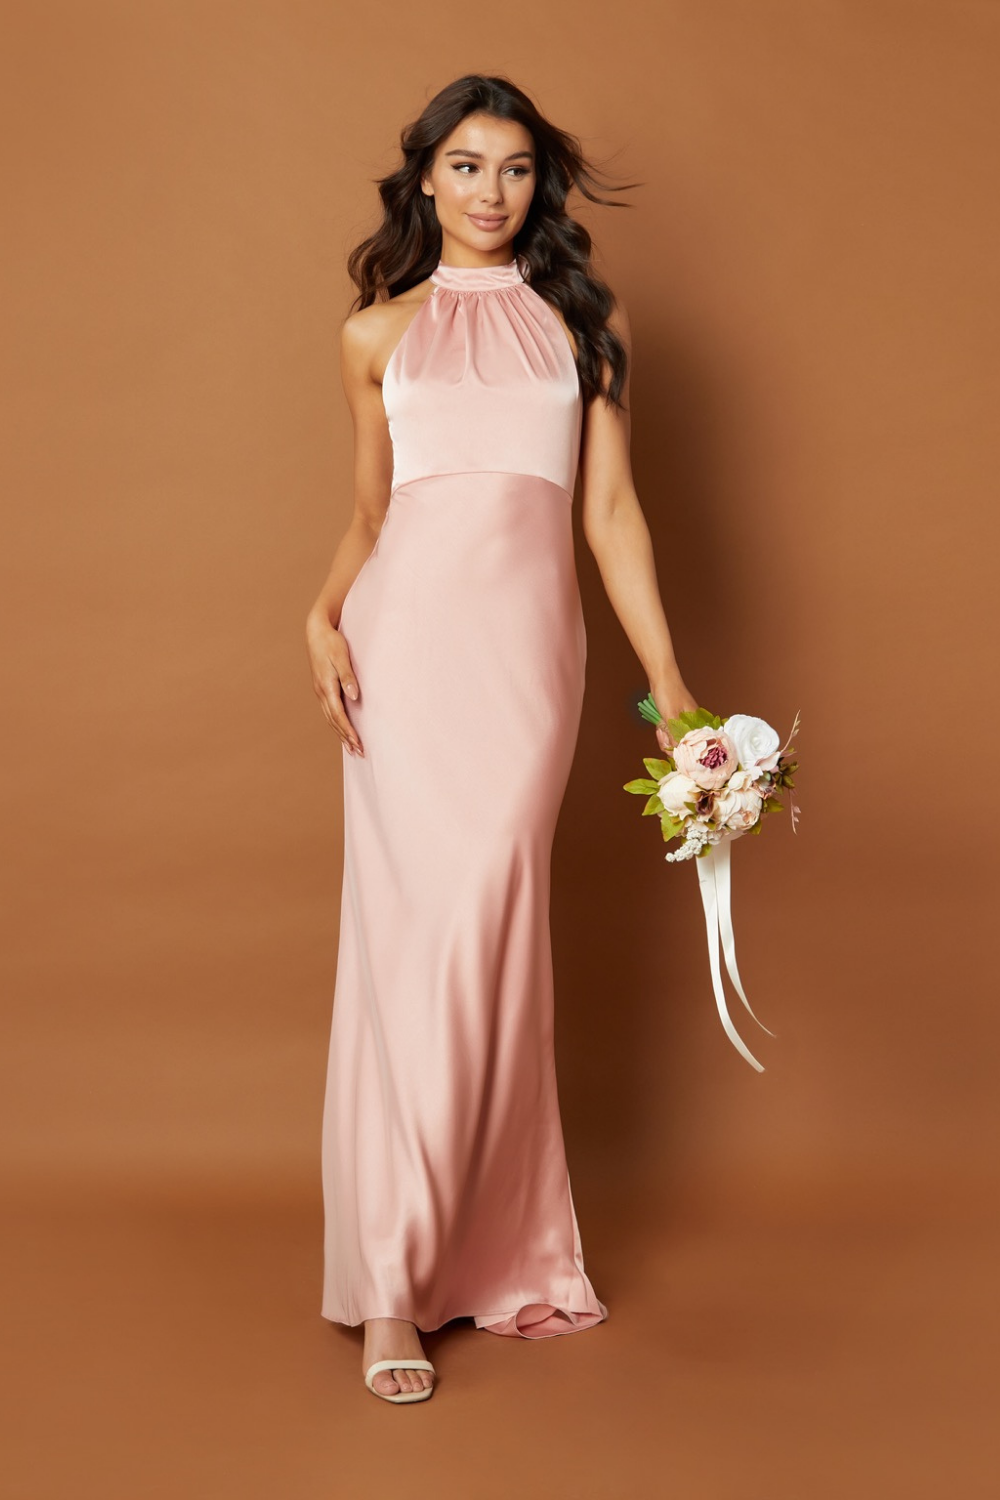 Starlette Halter Neck Maxi Dress with Back Tie and Button Back Detail, UK 18 / US 14 / EU 46 / Blush